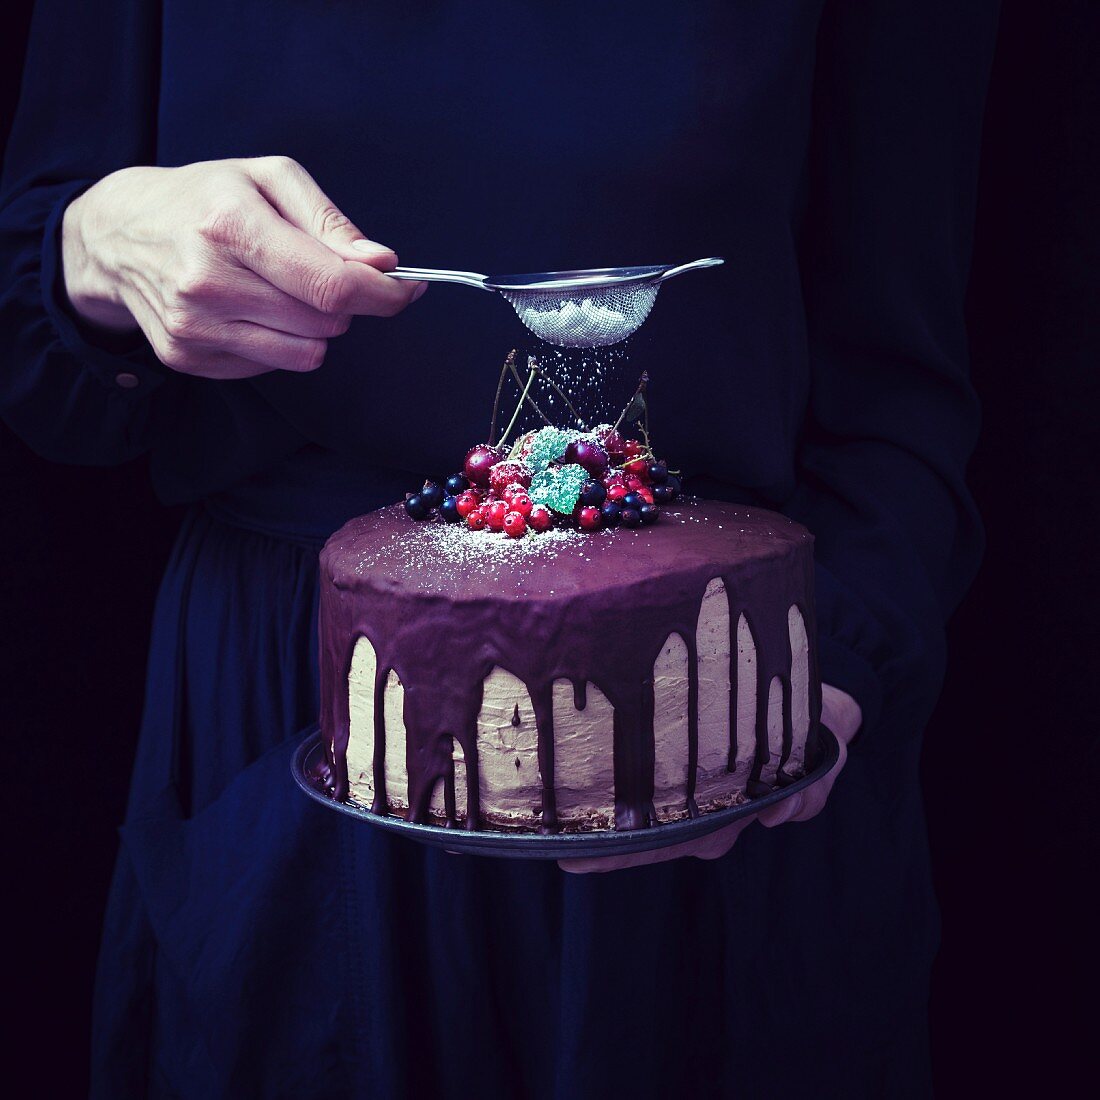 A woman's hand dusting icing sugar over a vegan chocolate cake decorated with fruits